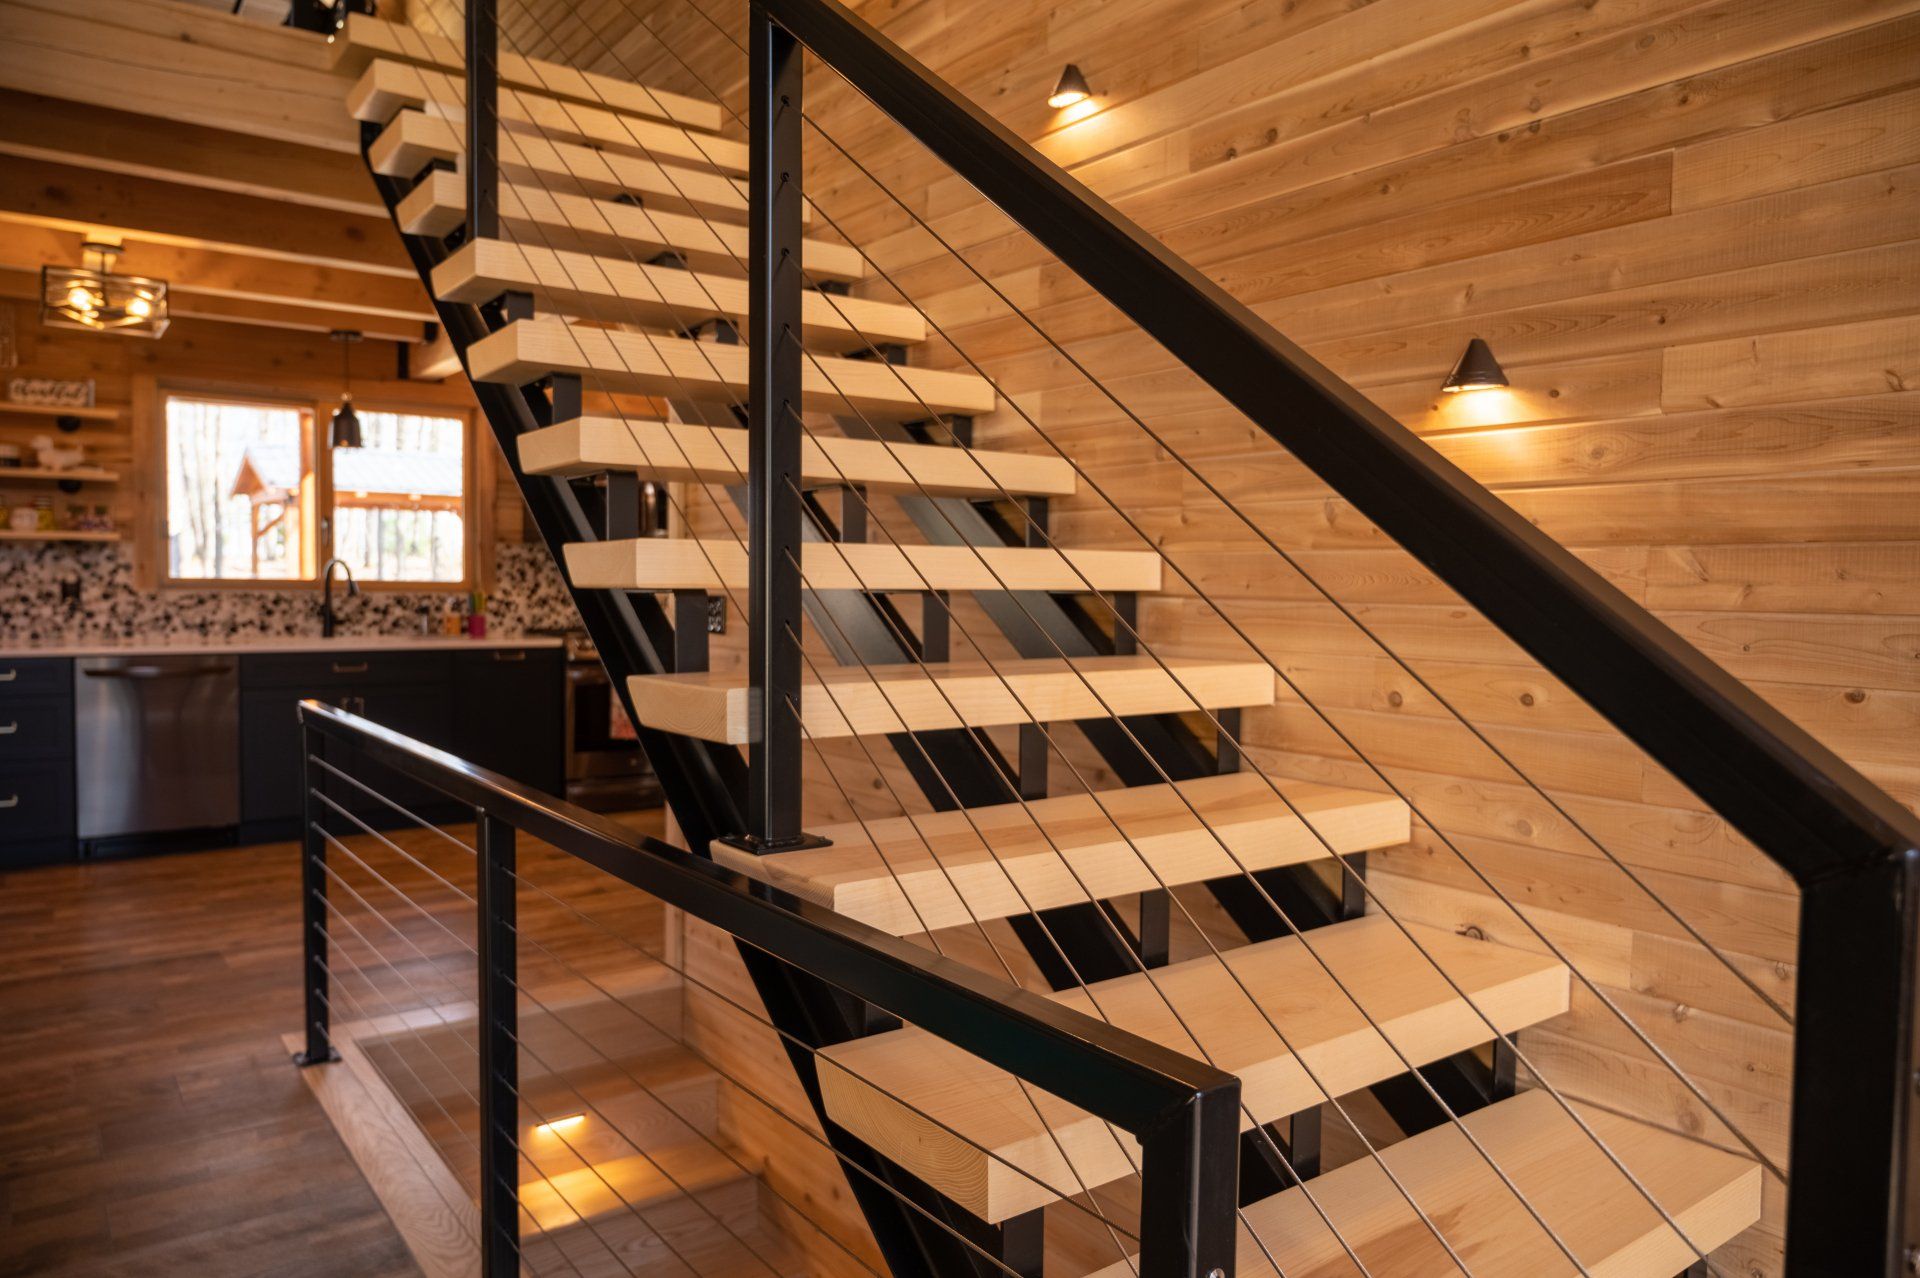 Think Log Homes are Dark? Not These Design Elements! | Pittsburgh | Young's Cedar Log Homes